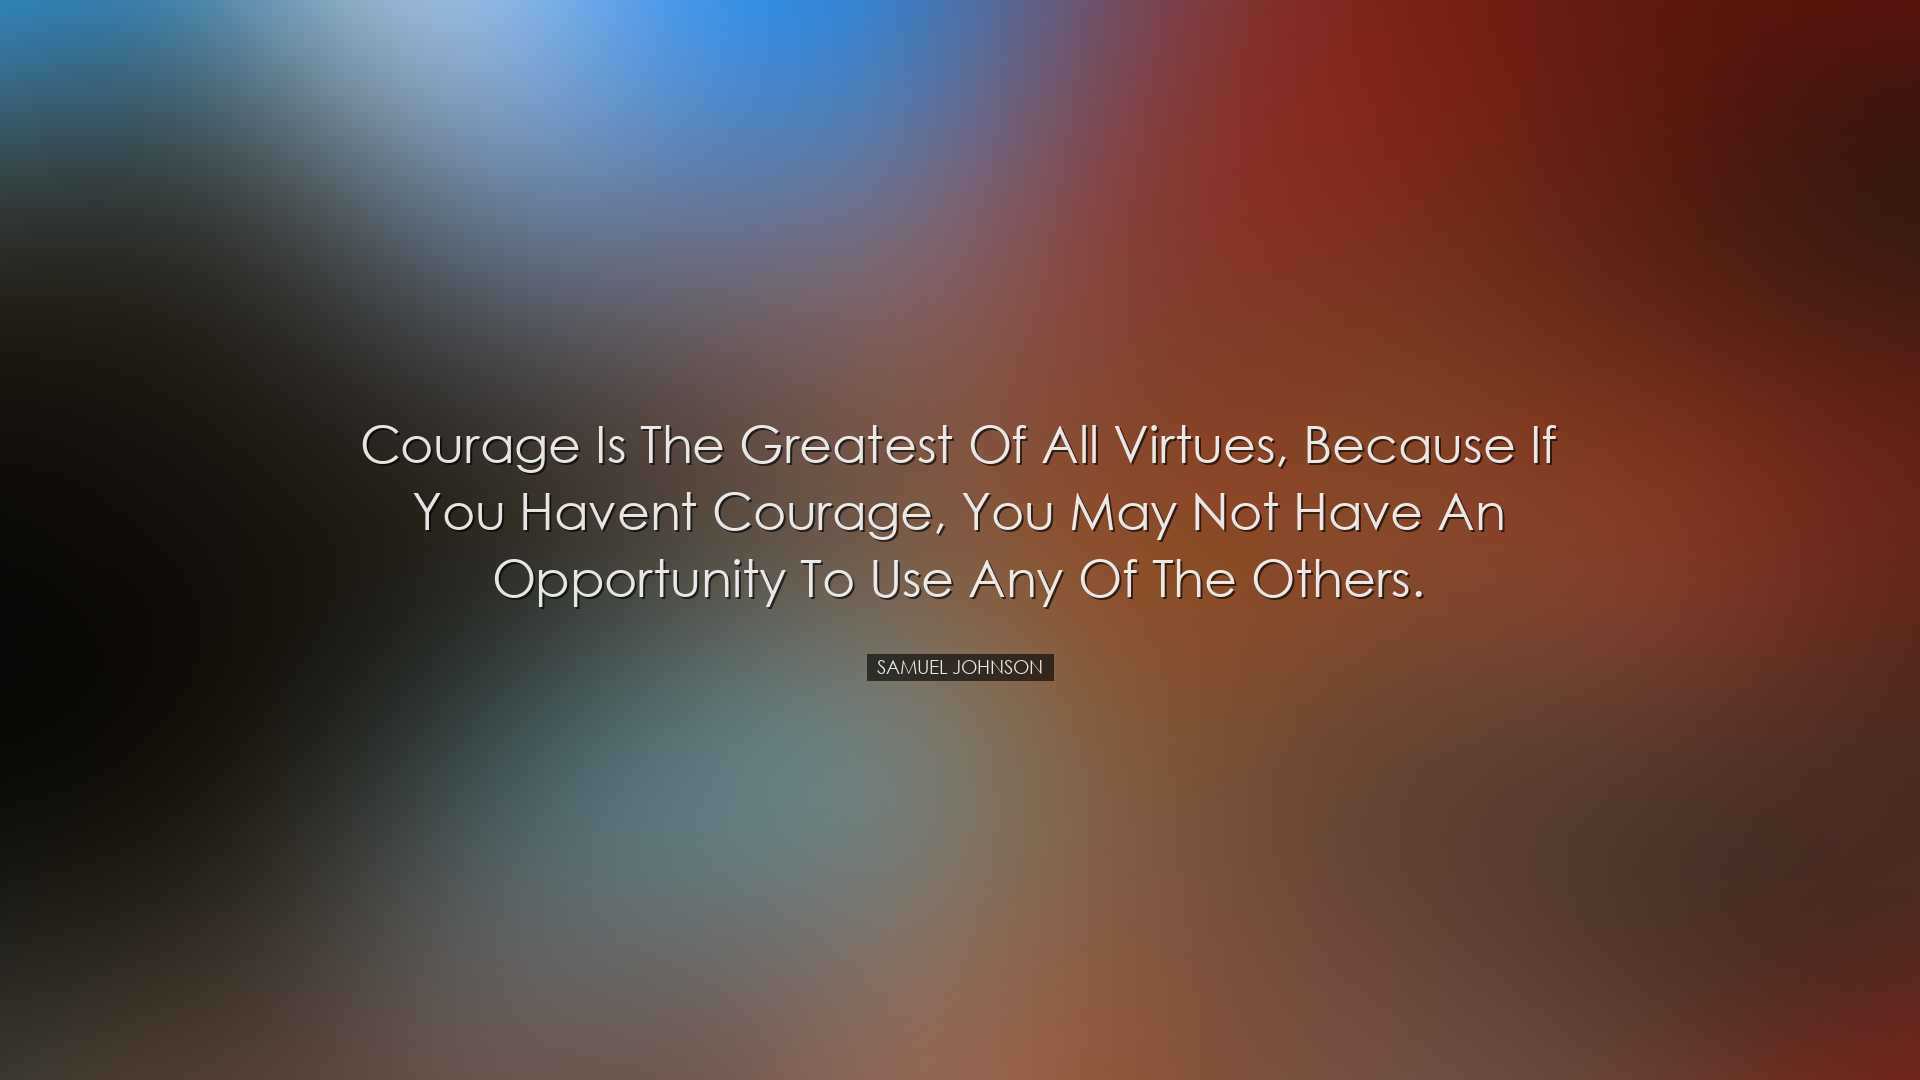 Courage is the greatest of all virtues, because if you havent cour